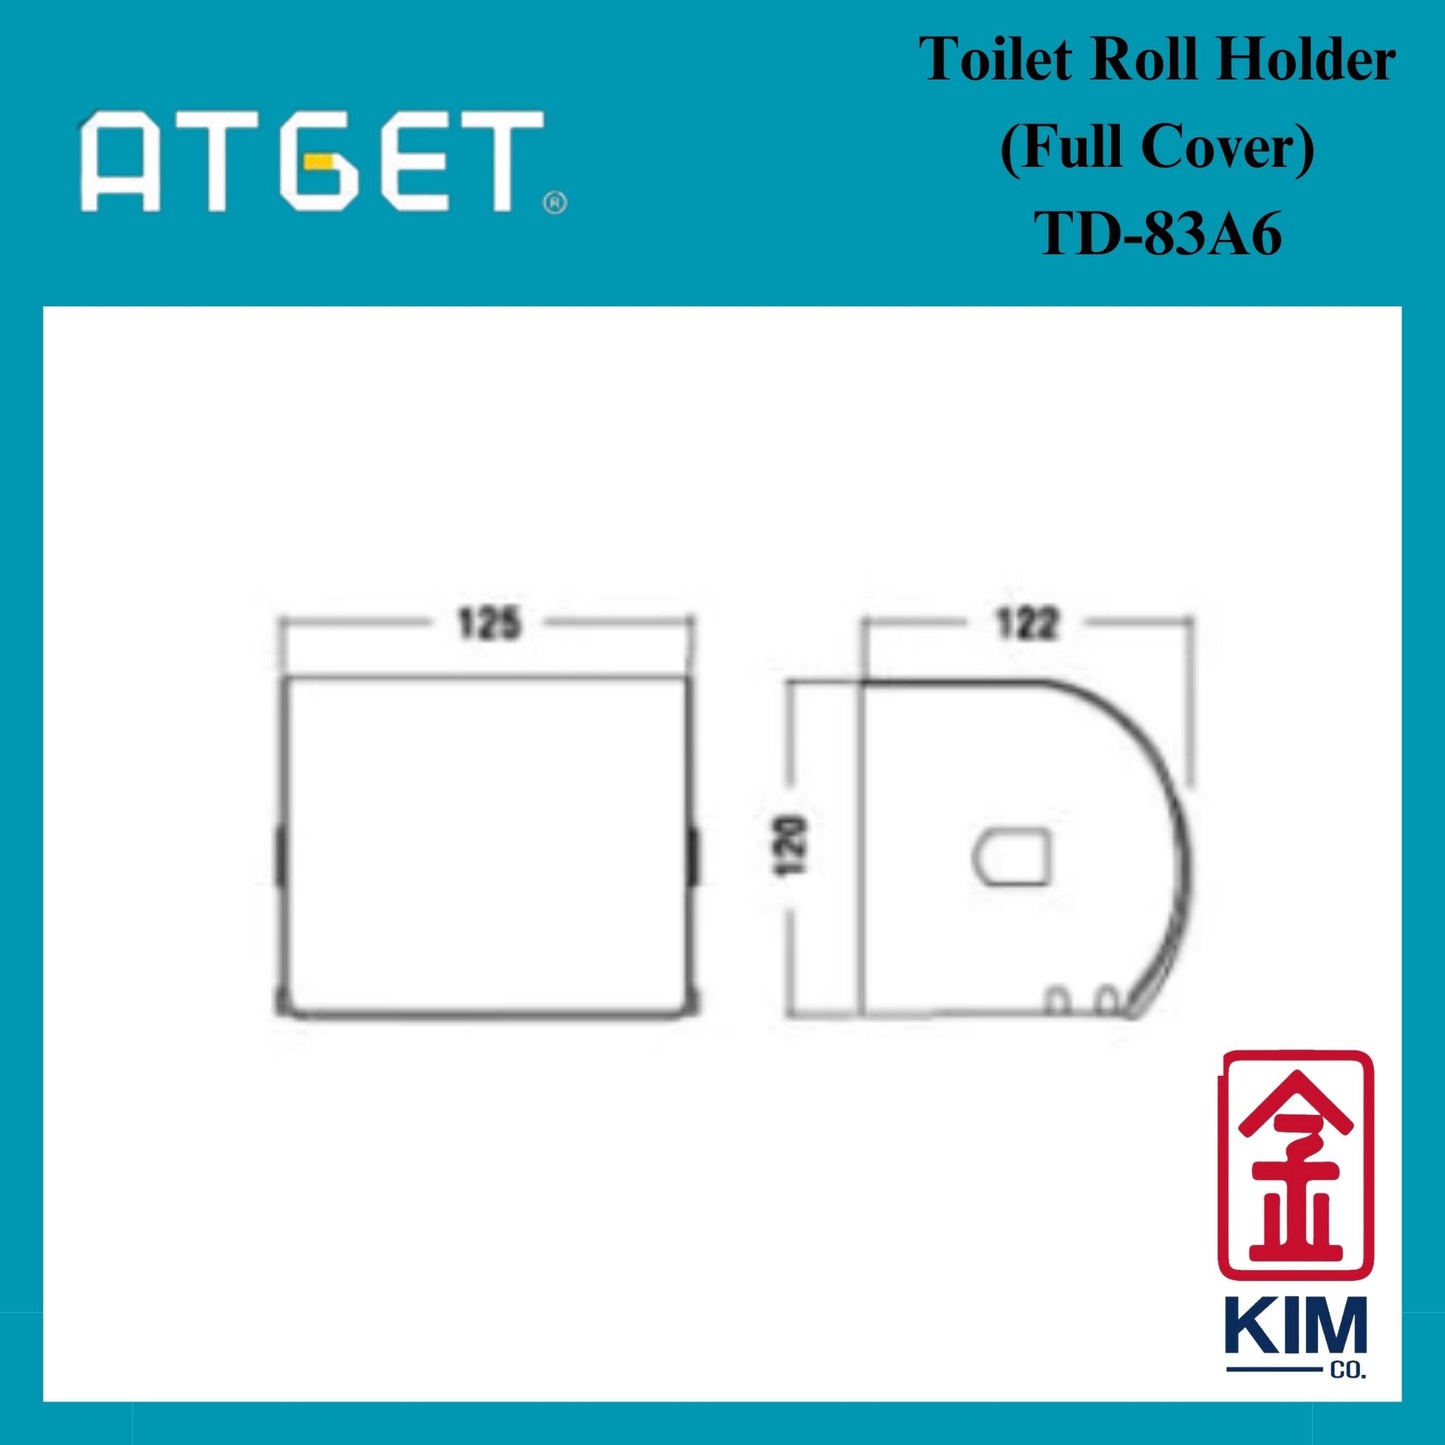 Atget Stainless Steel 304 Toilet Roll Holder With Full Cover (TD-83A6)